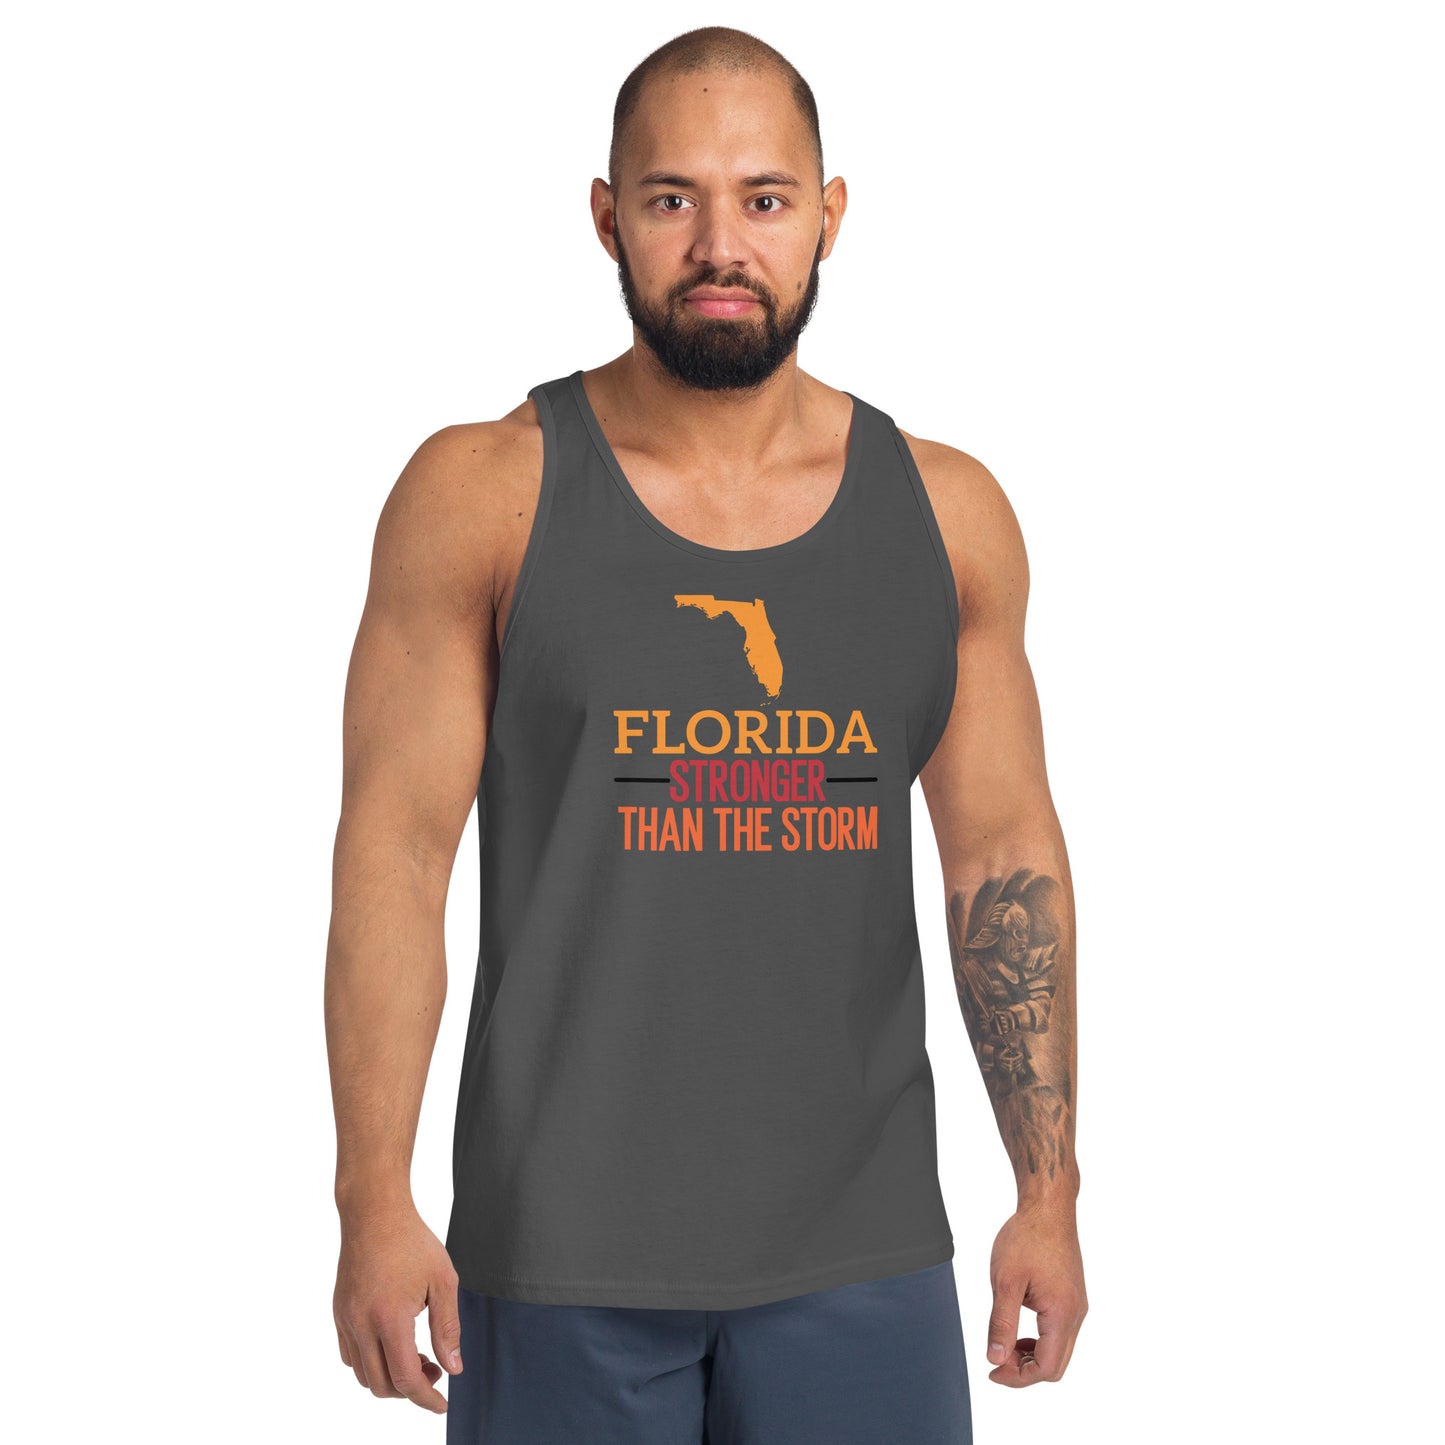 Florida Stronger Than The Storm Unisex Tank Top